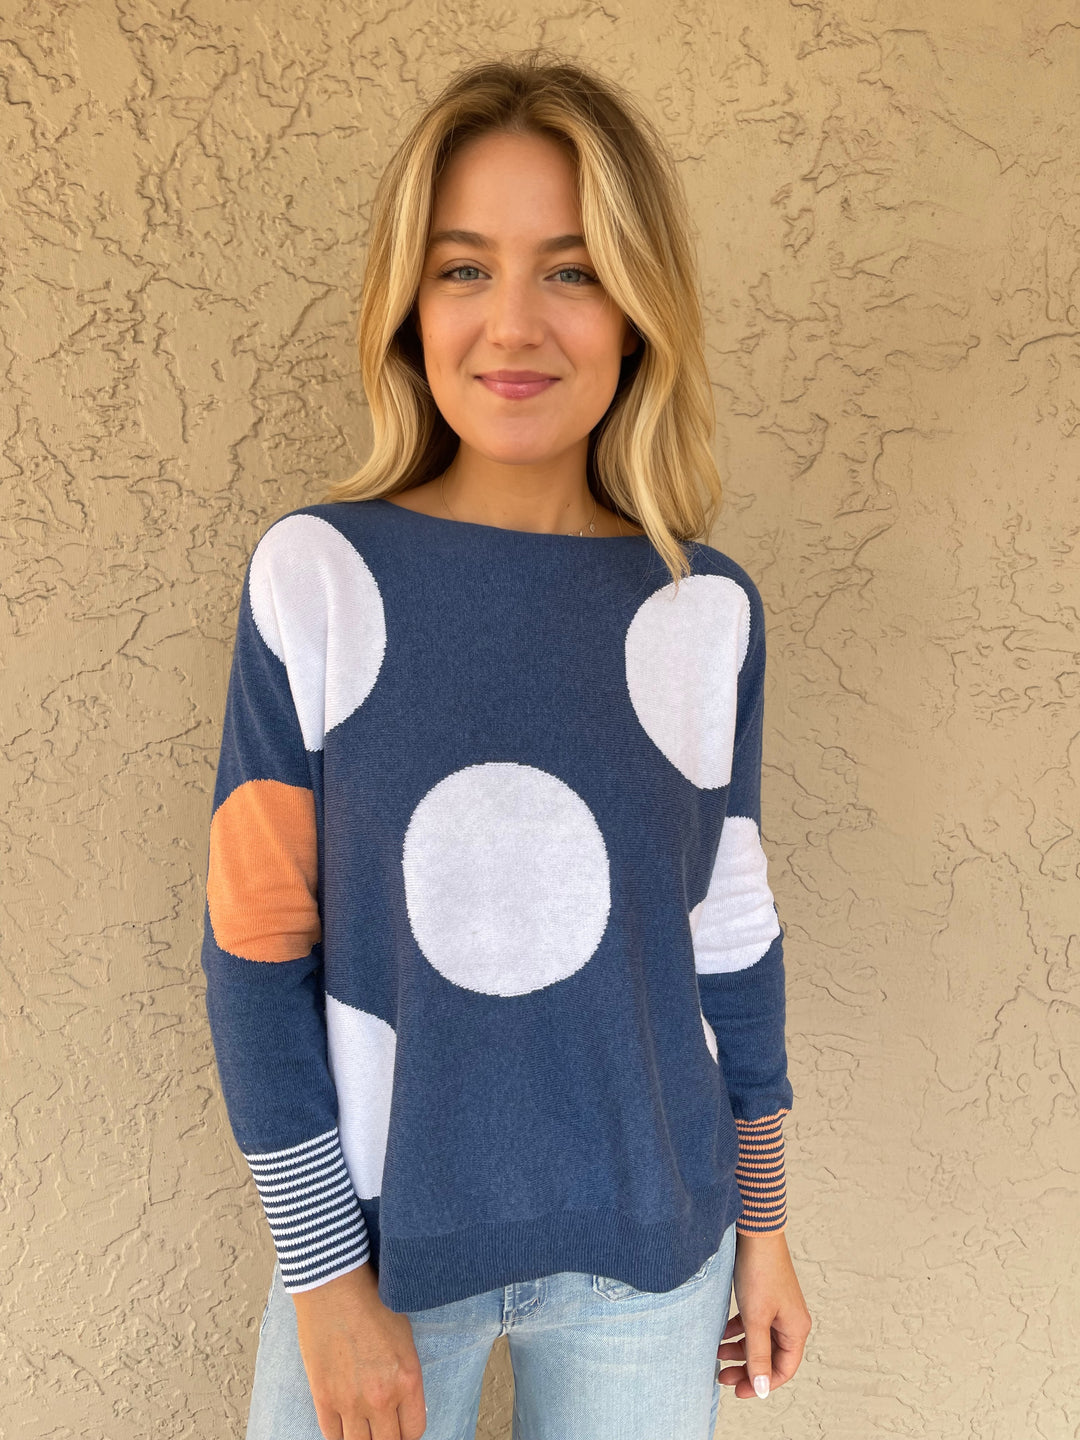 Zaket and Plover Spot Sweater - Jean